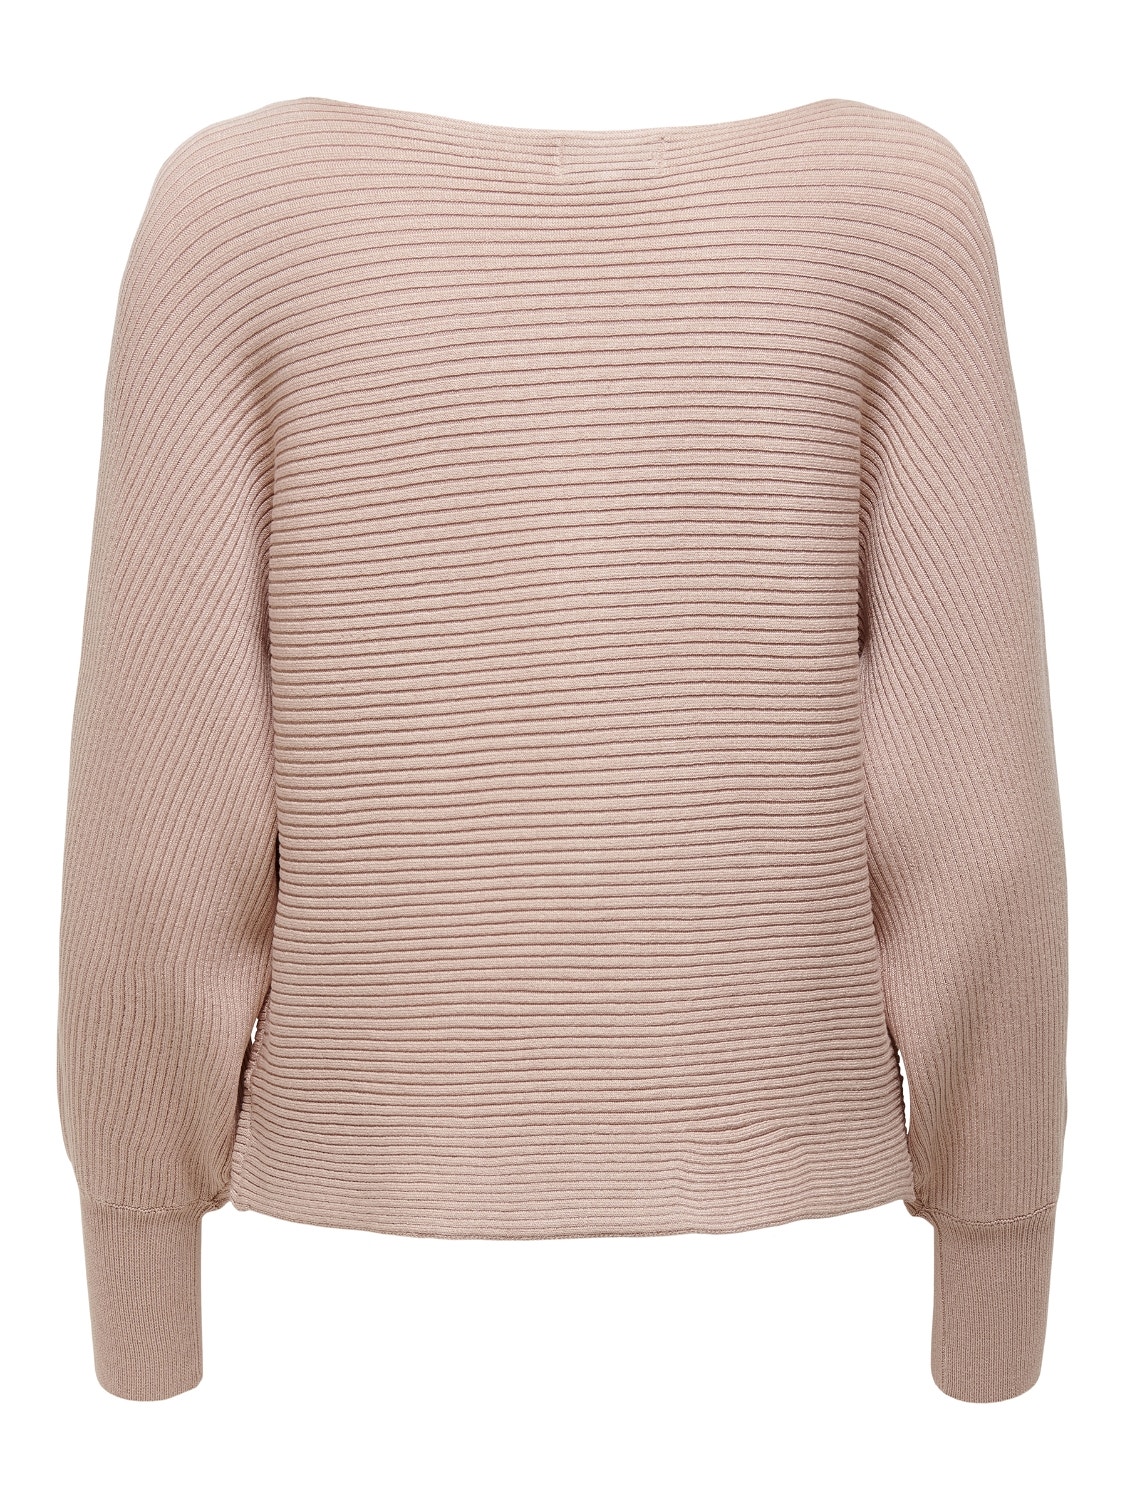 ONLY Pull-overs Col bateau Bas hauts -Misty Rose - 15226298